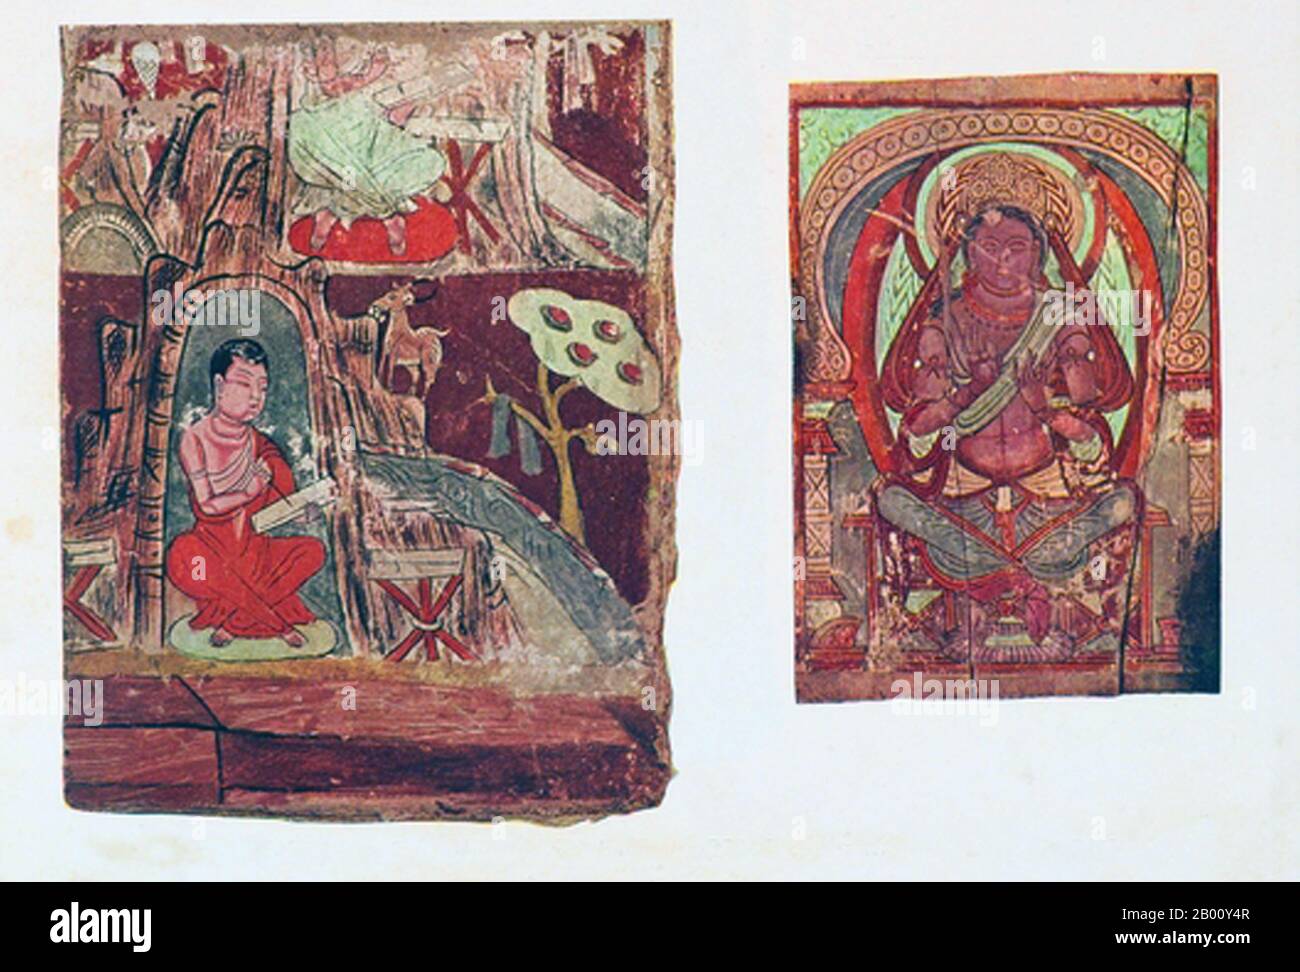 China/Silk Road: Bodhisattvas and acolytes in murals from Turfan Oasis, Xinjiang, c. 7th-8th century CE.  The Turpan Oasis was a strategically significant centre on Xinjiang’s Northern Silk Route, site of the ancient cities of Yarkhoto (Jiaohe) and Karakhoja (Gaochang). Chinese armies first entered Turpan in the 2nd century BCE, during the reign of Han Emperor Wu Di (141-87) when the oasis was a centre of Indo-European Tocharian culture.  Turpan retained a distinctly Buddhist character until the time of the Chagatai Khanate in the 13th century, when Islam gradually became the dominant religion Stock Photo